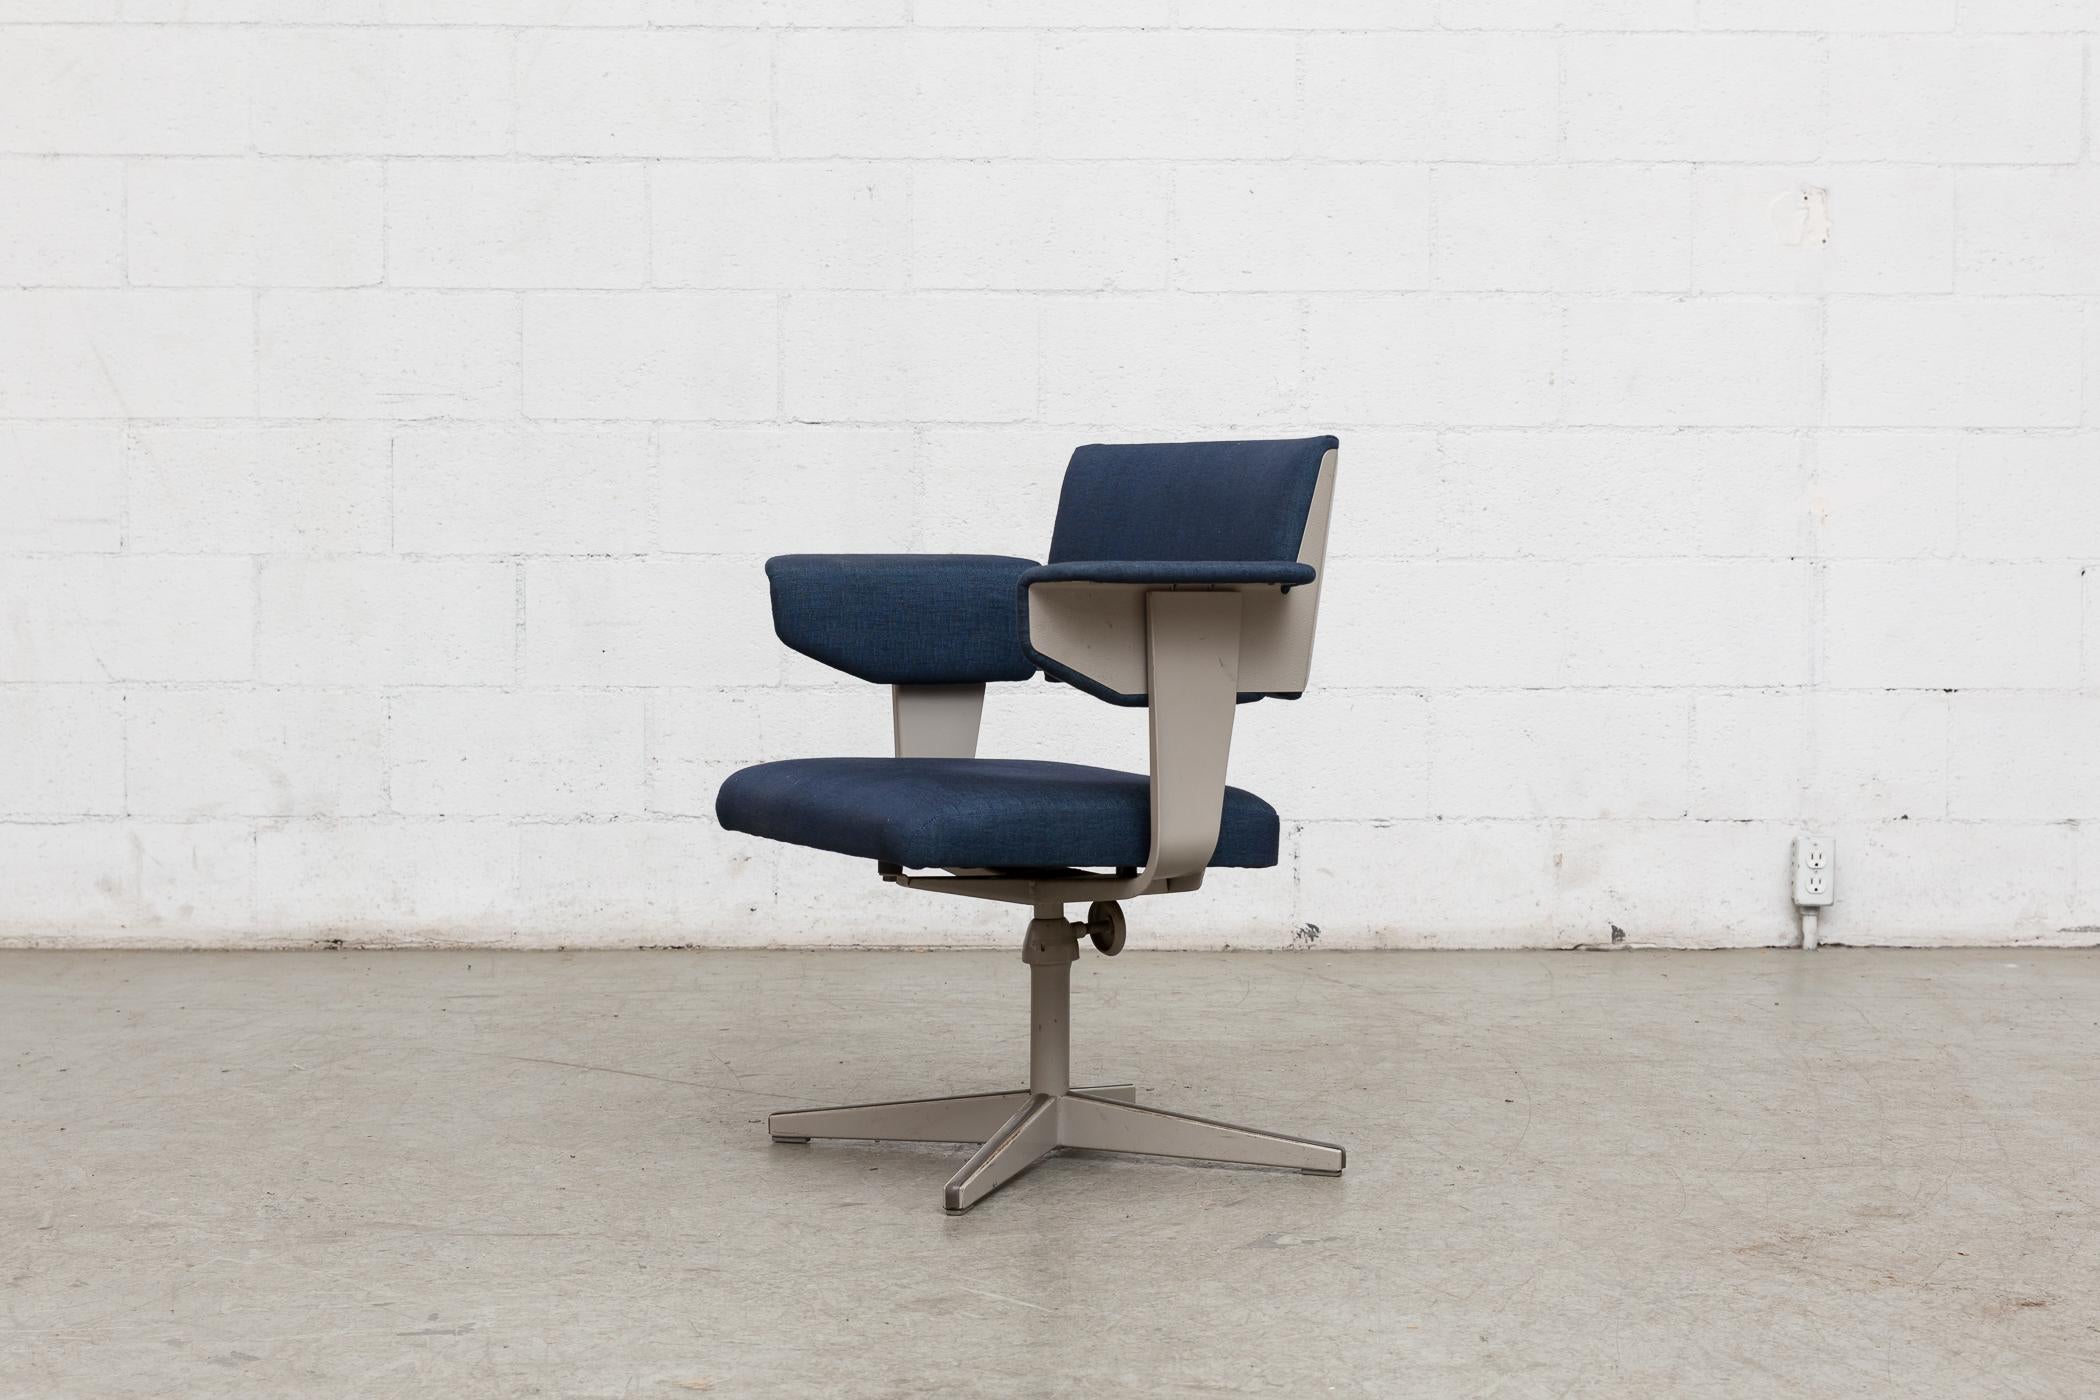 Rare metal framed office chair with adjustable height. Industrial enameled dove grey frame in original condition with visible wear and with some discoloration to enamel. Newly upholstered in indigo blue fabric.